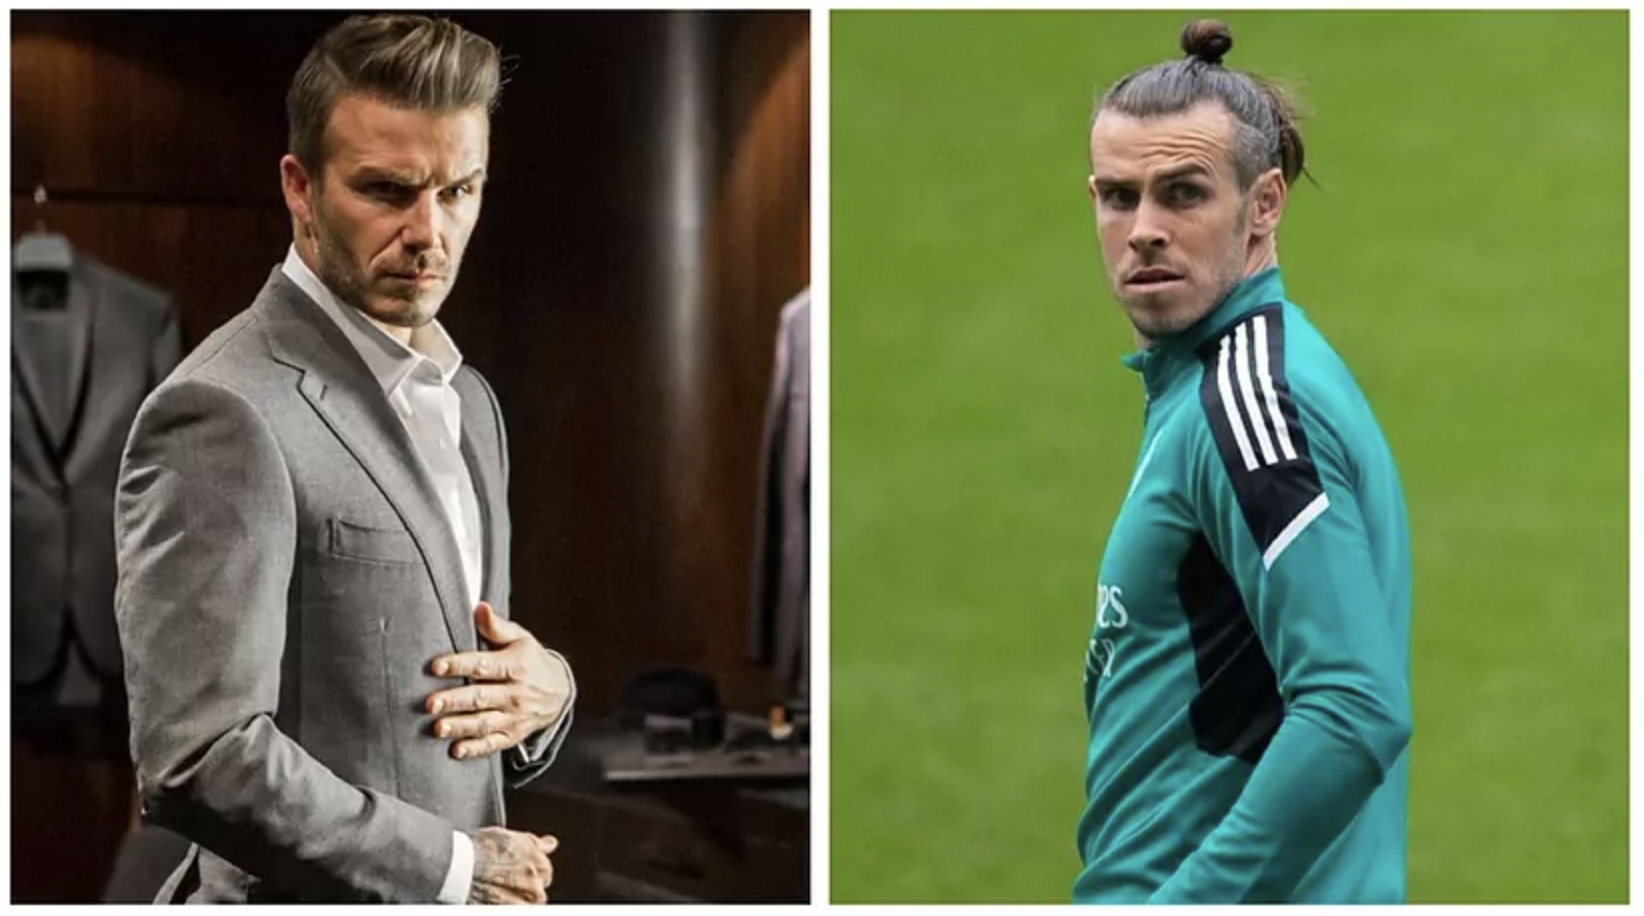 Gareth Bale and David Beckham join in mourning the death of Queen Elizabeth II